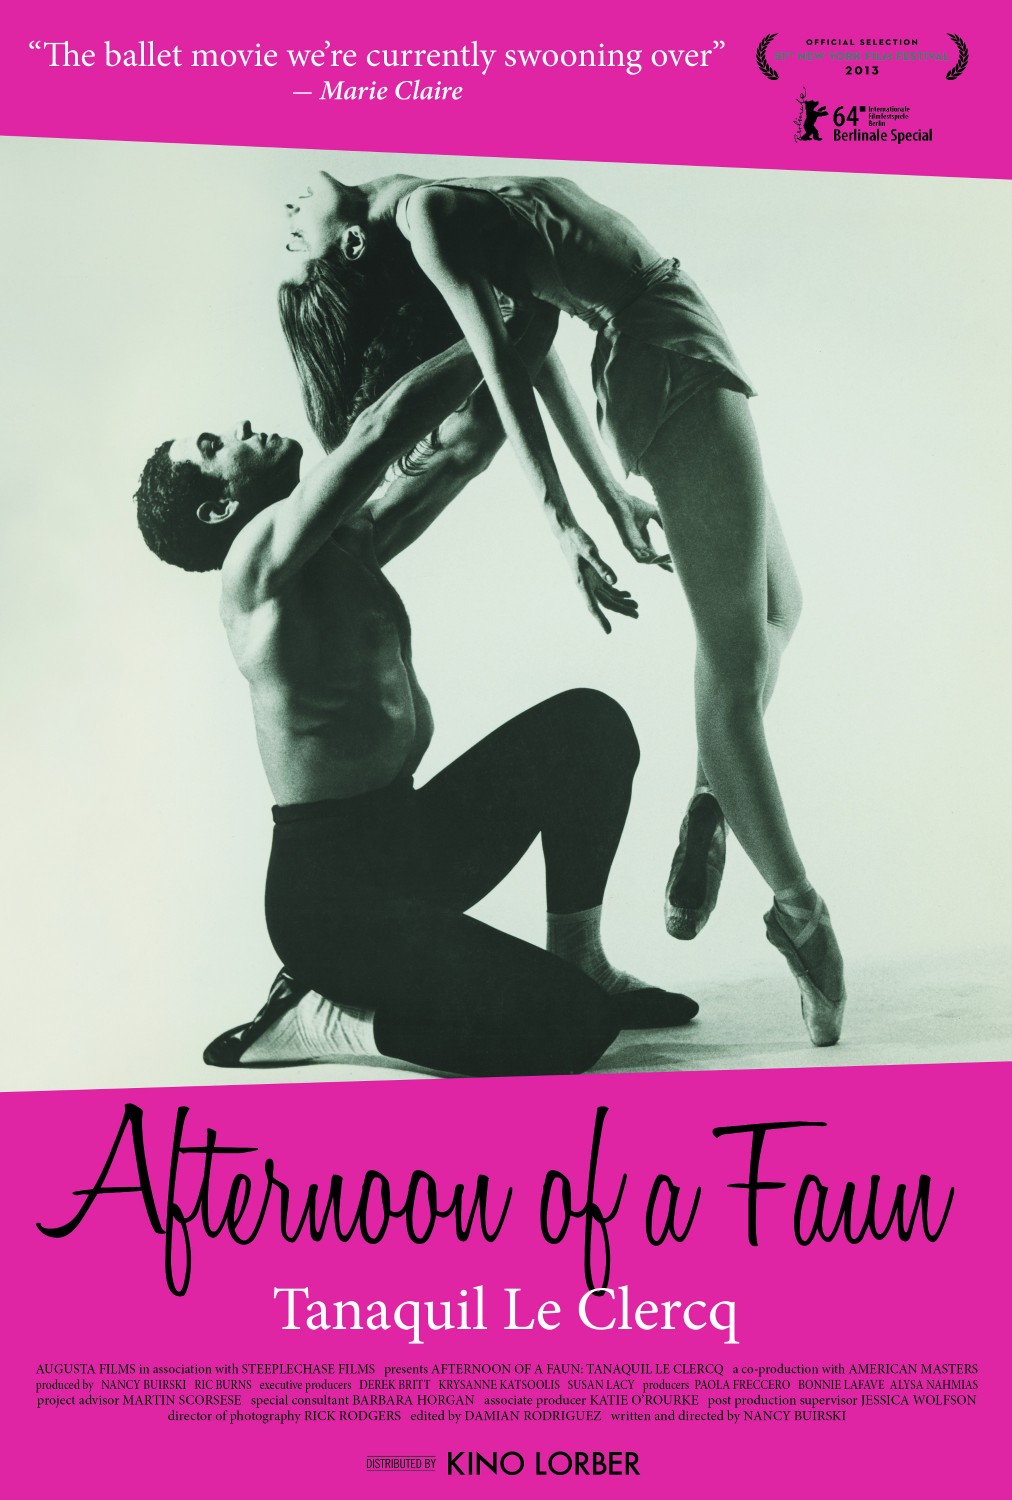 Extra Large Movie Poster Image for Afternoon of a Faun: Tanaquil Le Clercq 